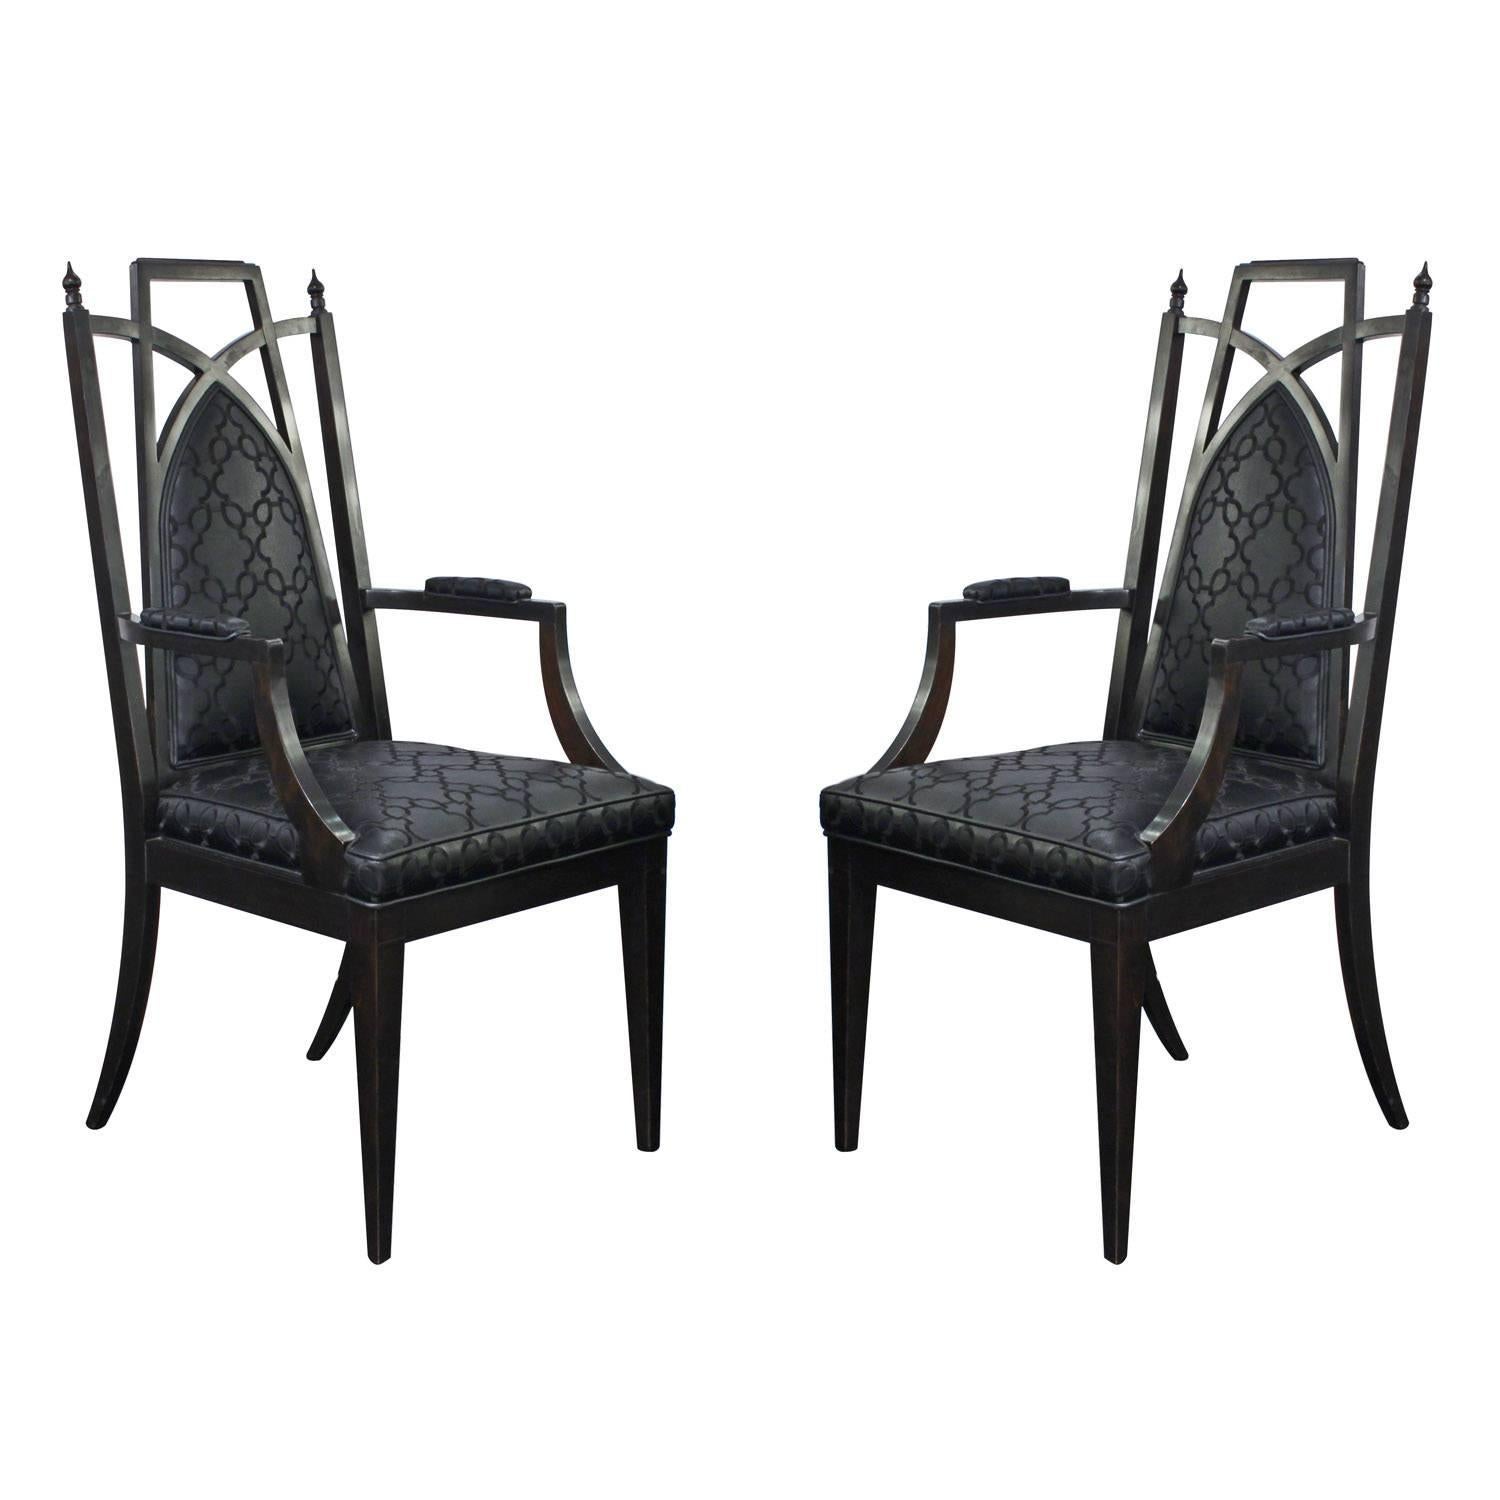 Pair of Chinoiserie Armchairs